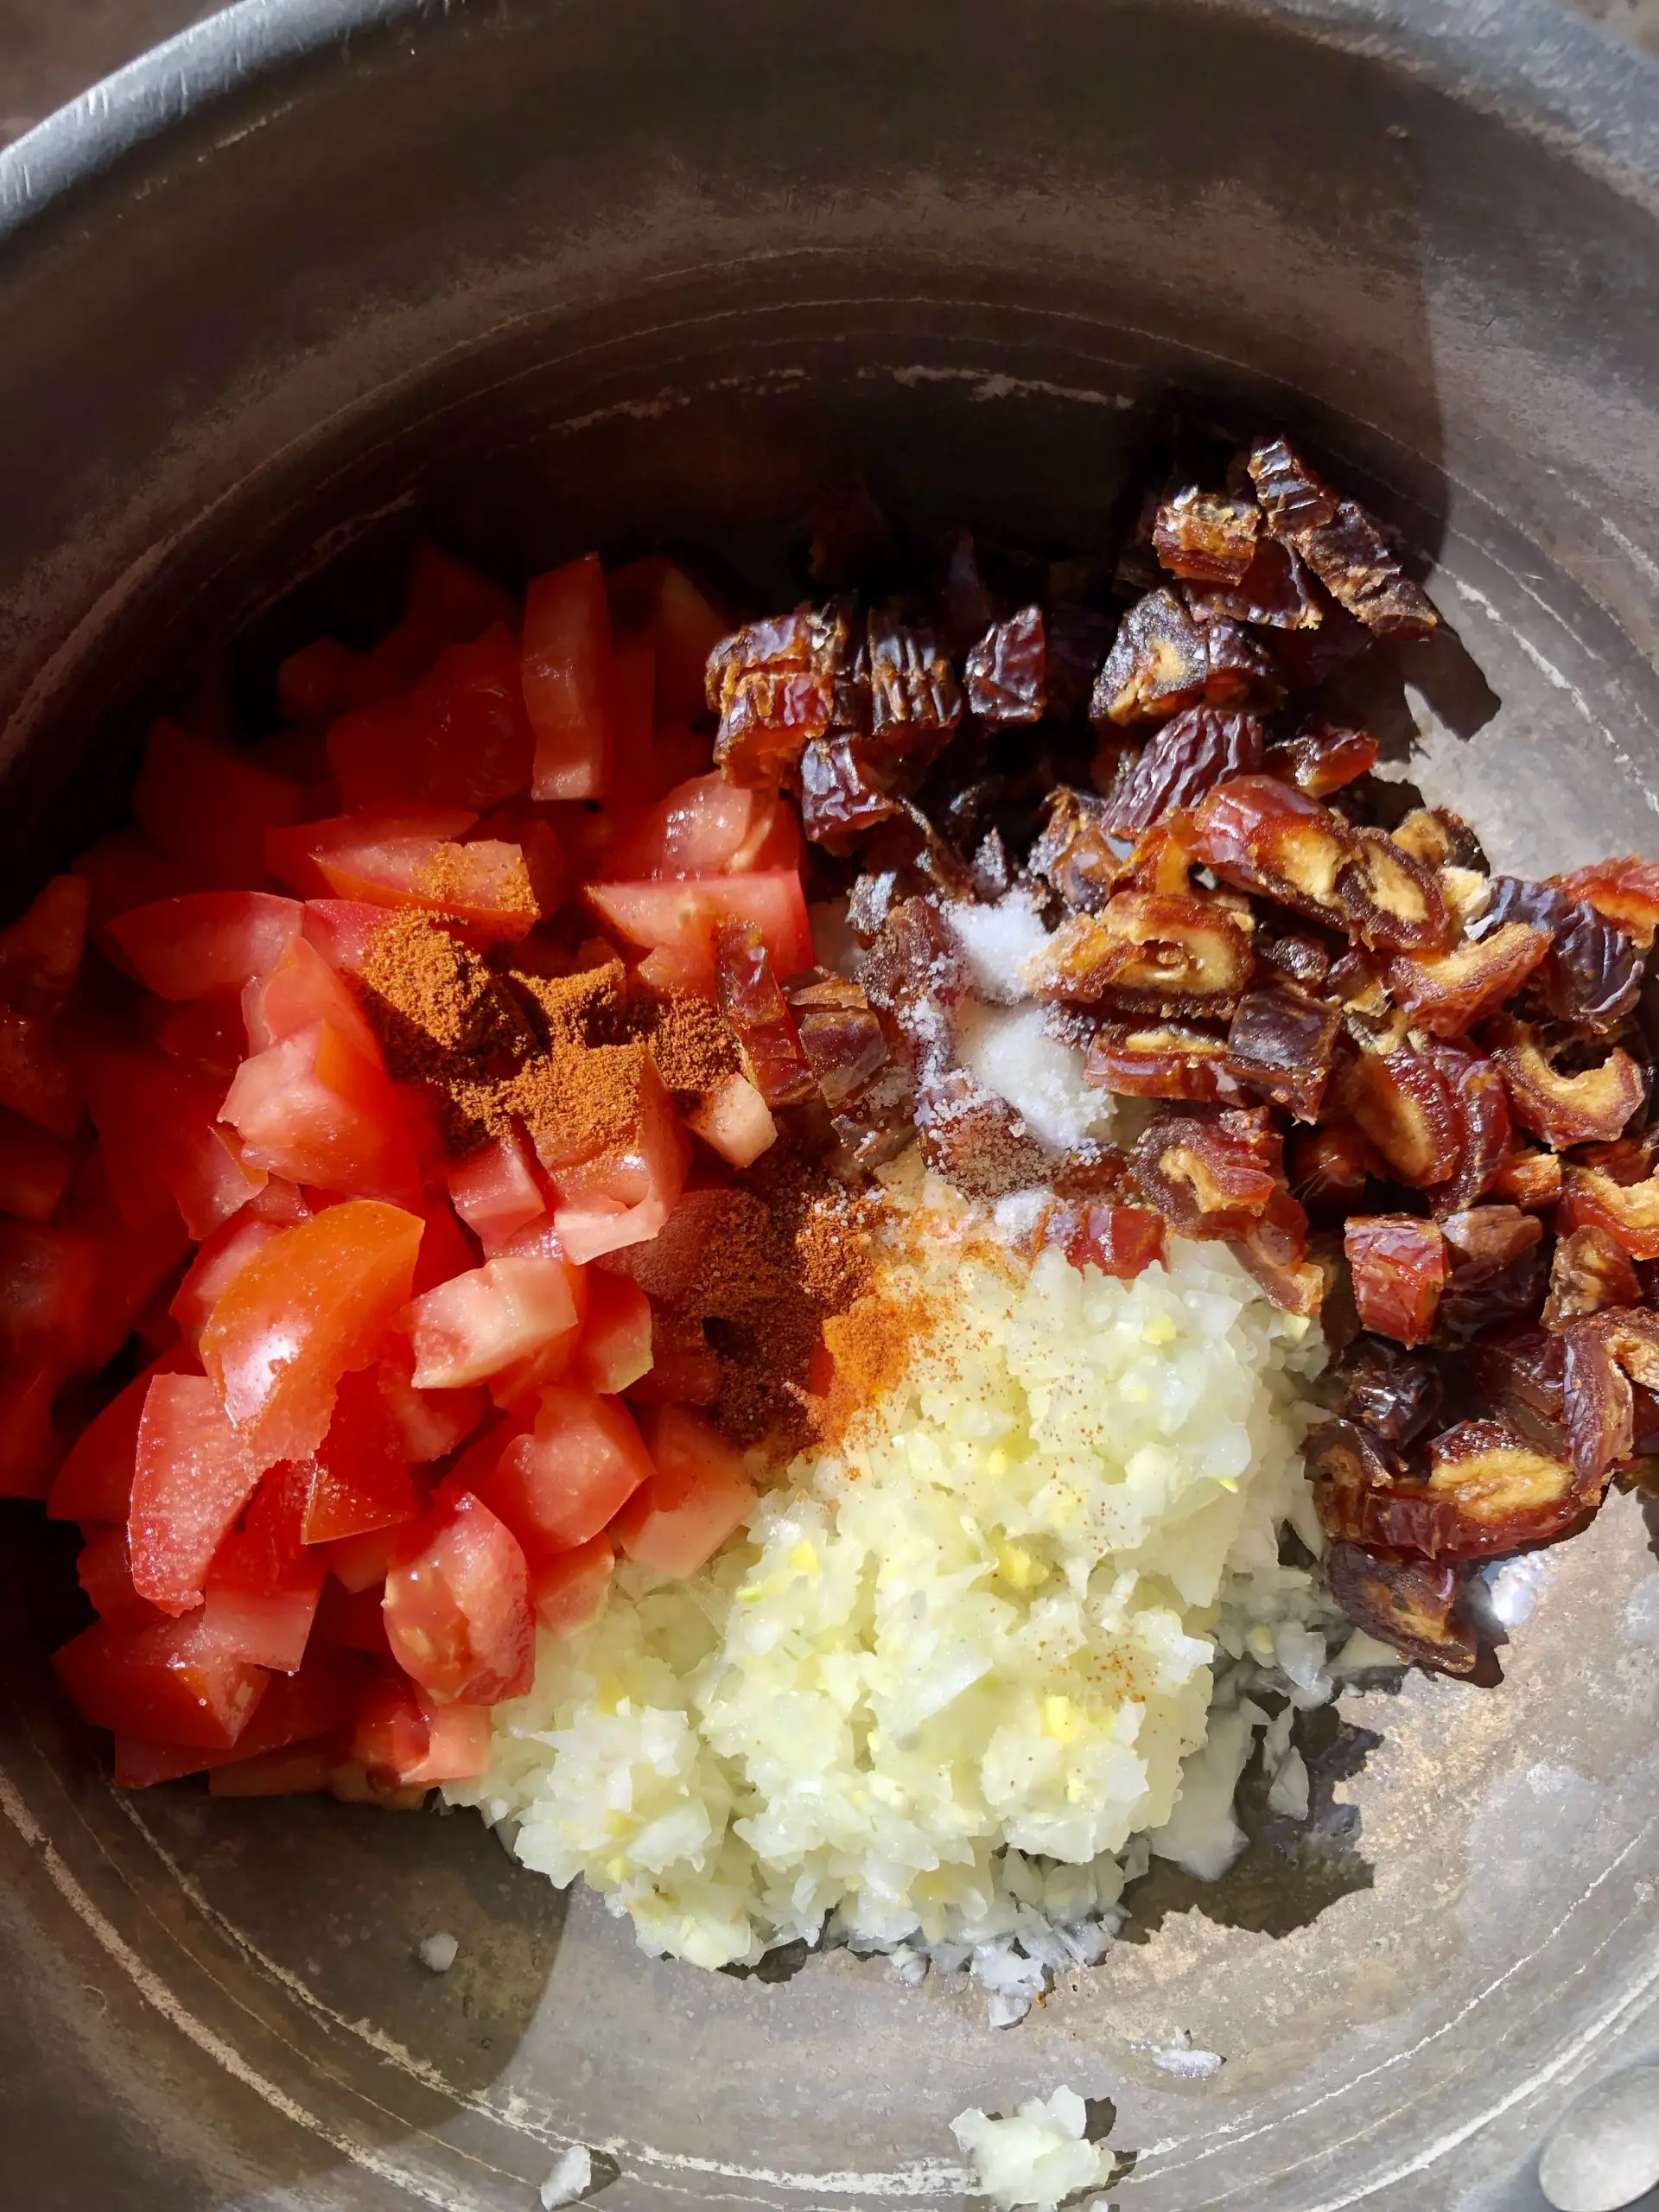 Diced tomatoes, diced onions, diced dates, minced ginger and garlic and spices in a saucepan